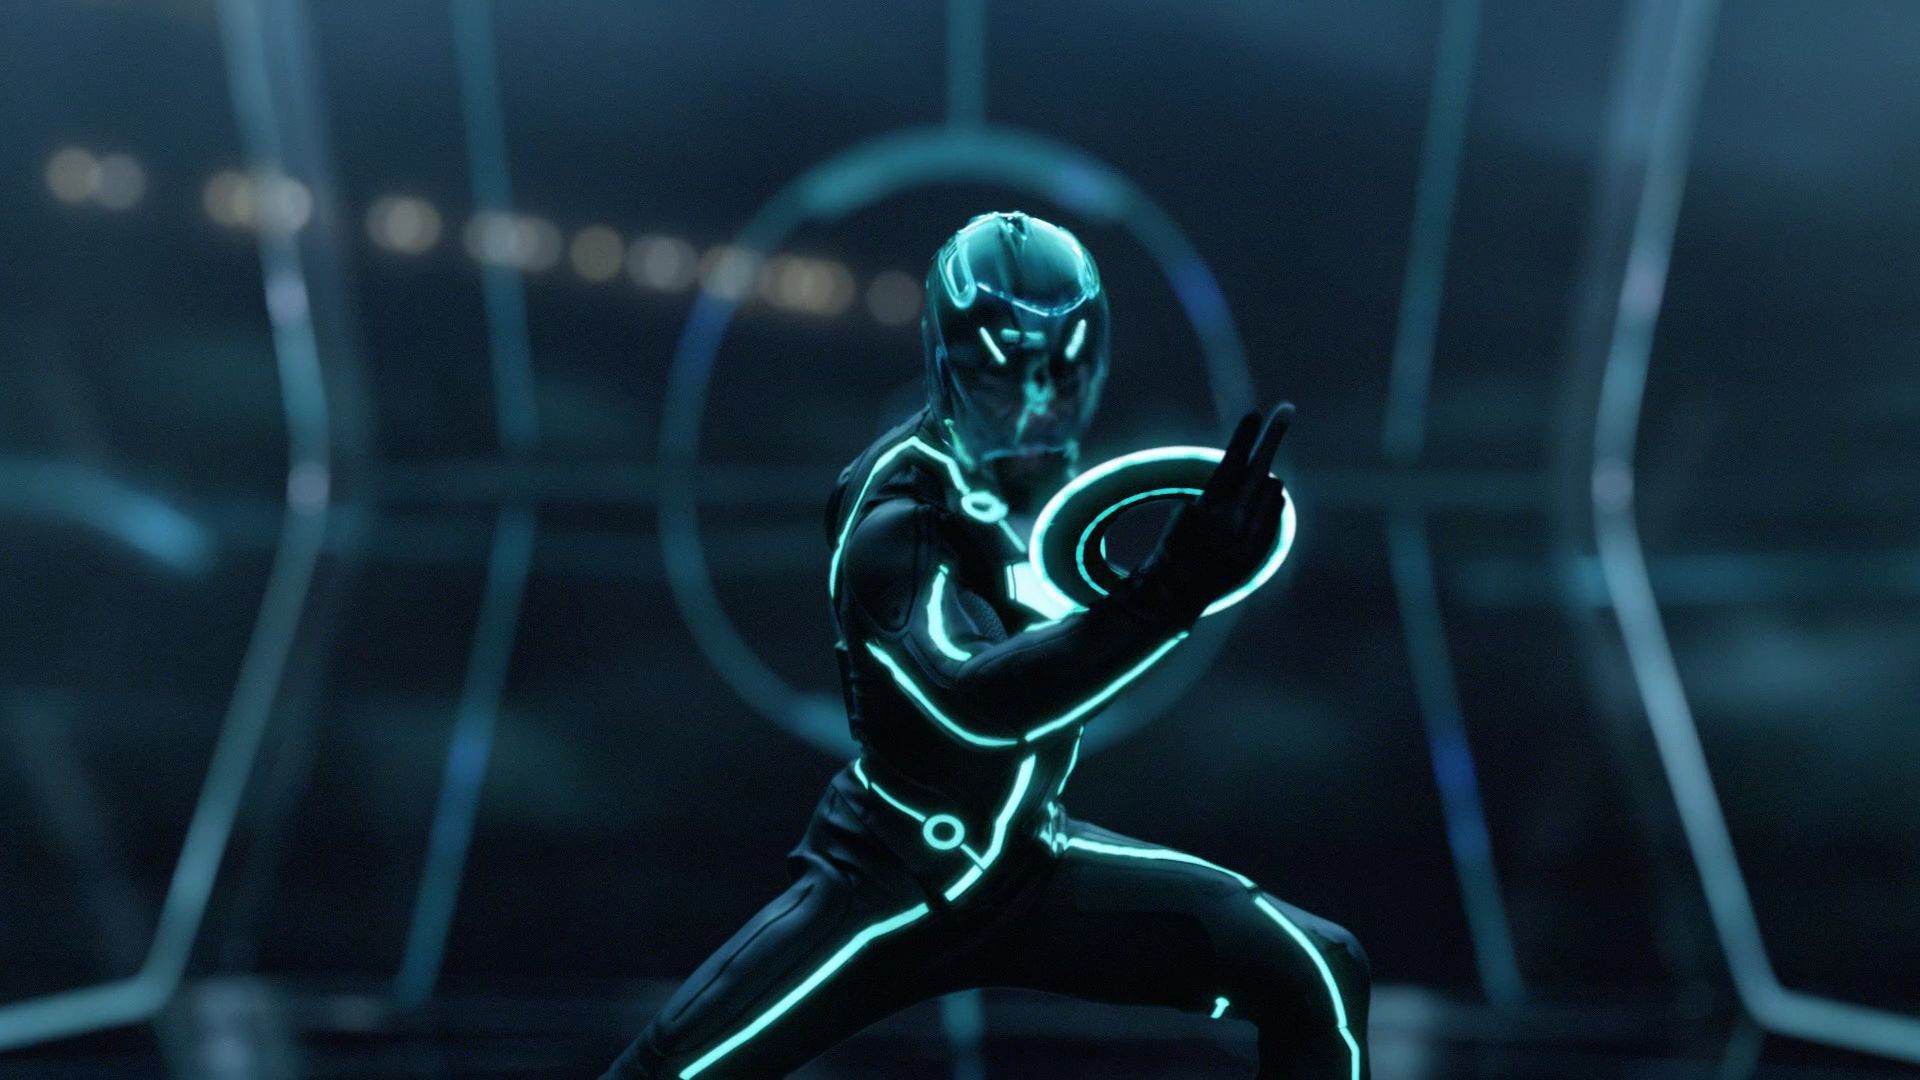 Is Tron 3 Gearing up to Shoot This Year? Here's All the Evidence We Have So Far